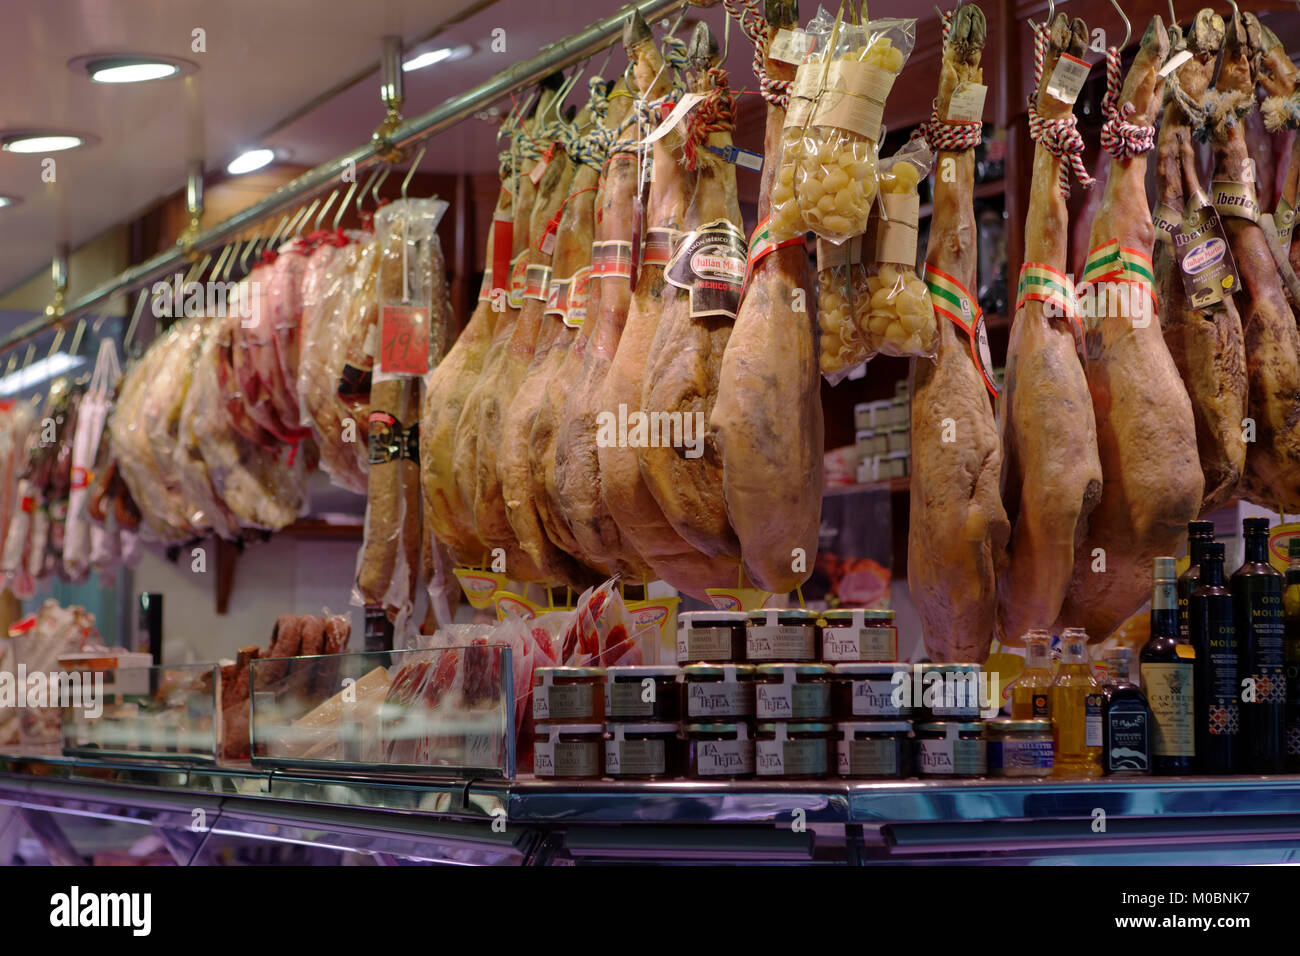 Barcelona, Spain - January 9, 2013: Jamons, sausages, and other meat products in a shop. Traditional Spanish jamon is widely known in the world Stock Photo